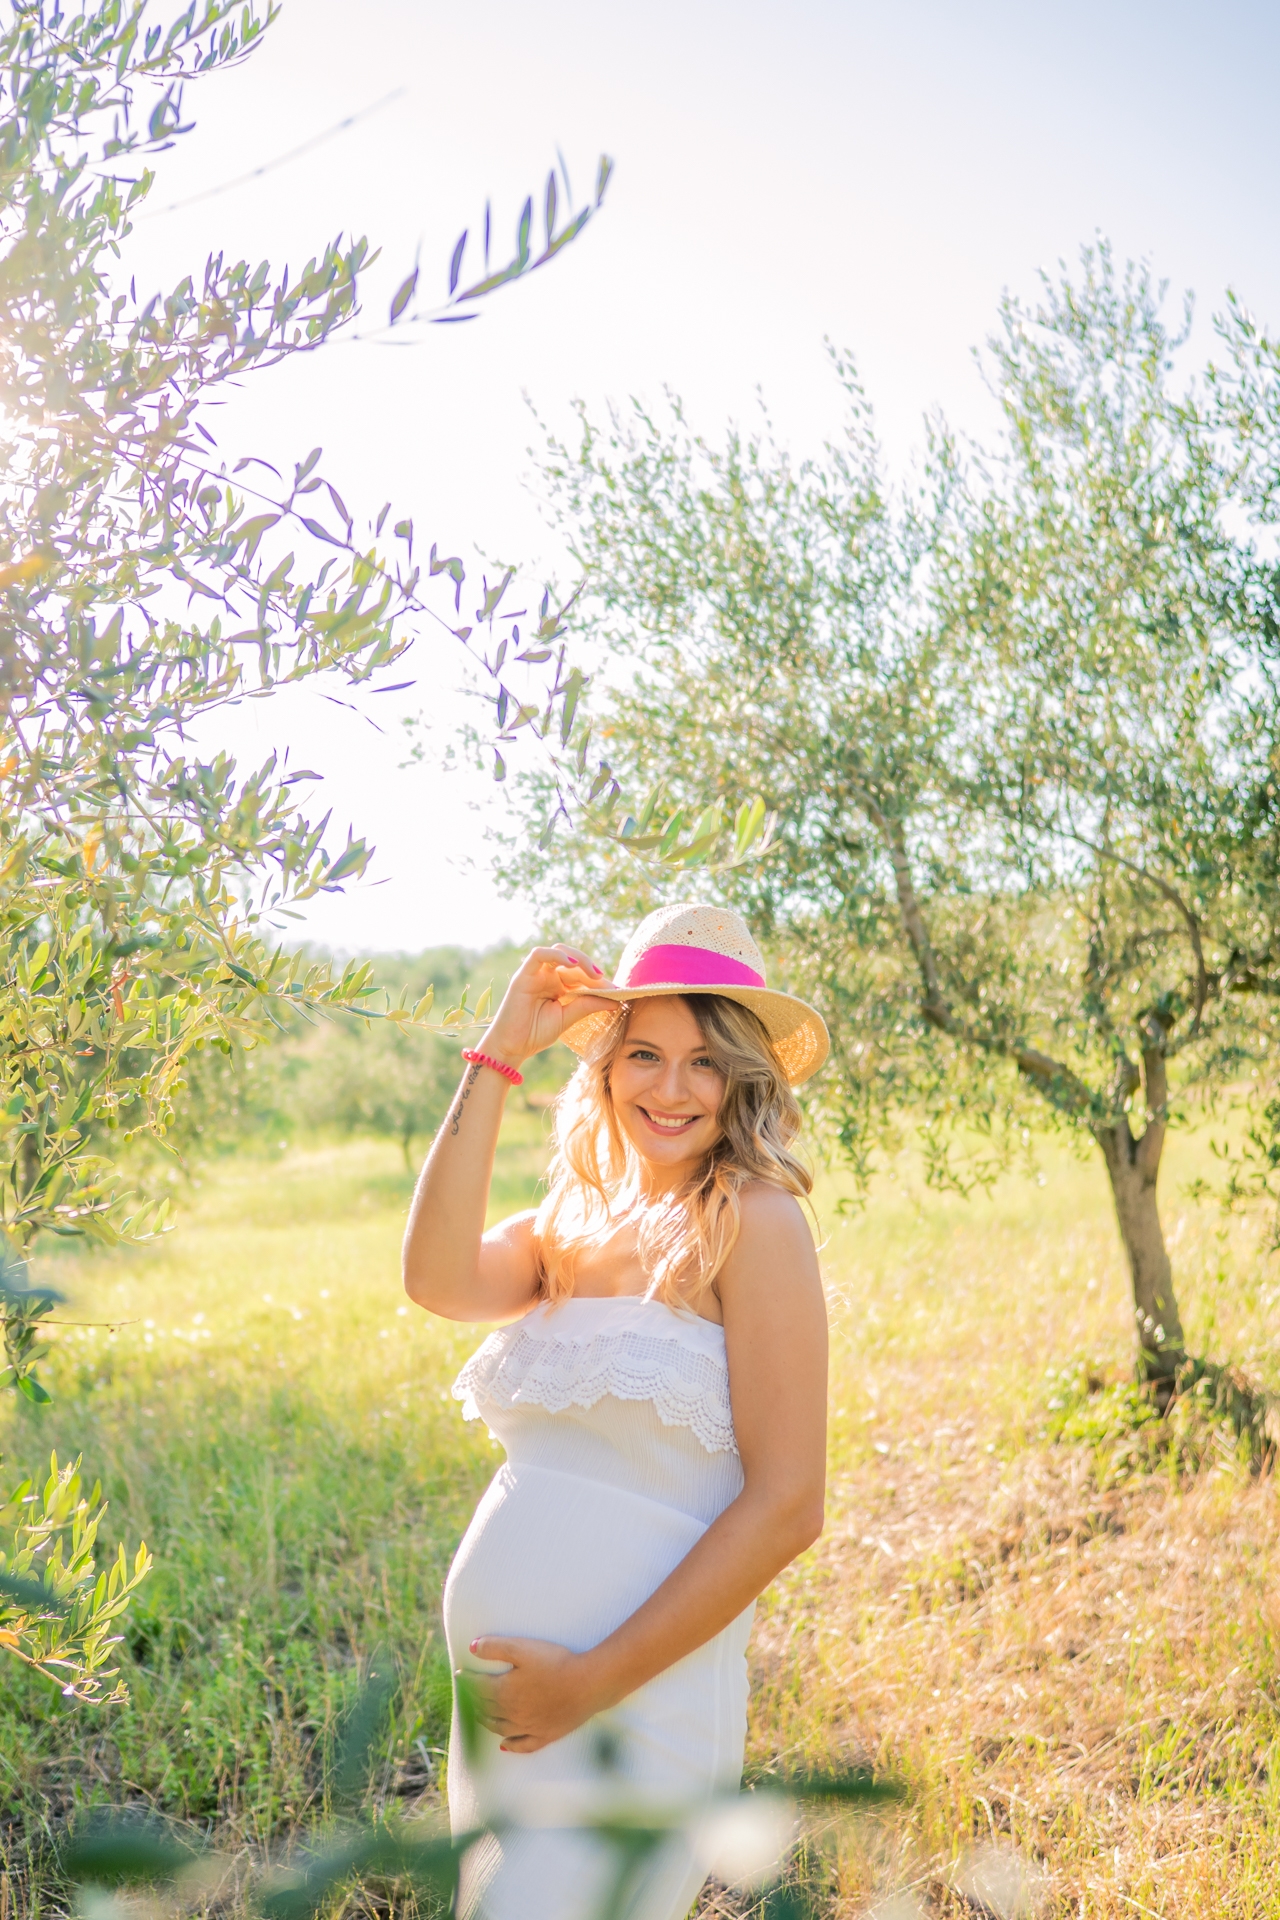 ﻿Pre maternity photoshoot day in Italy with best photographer